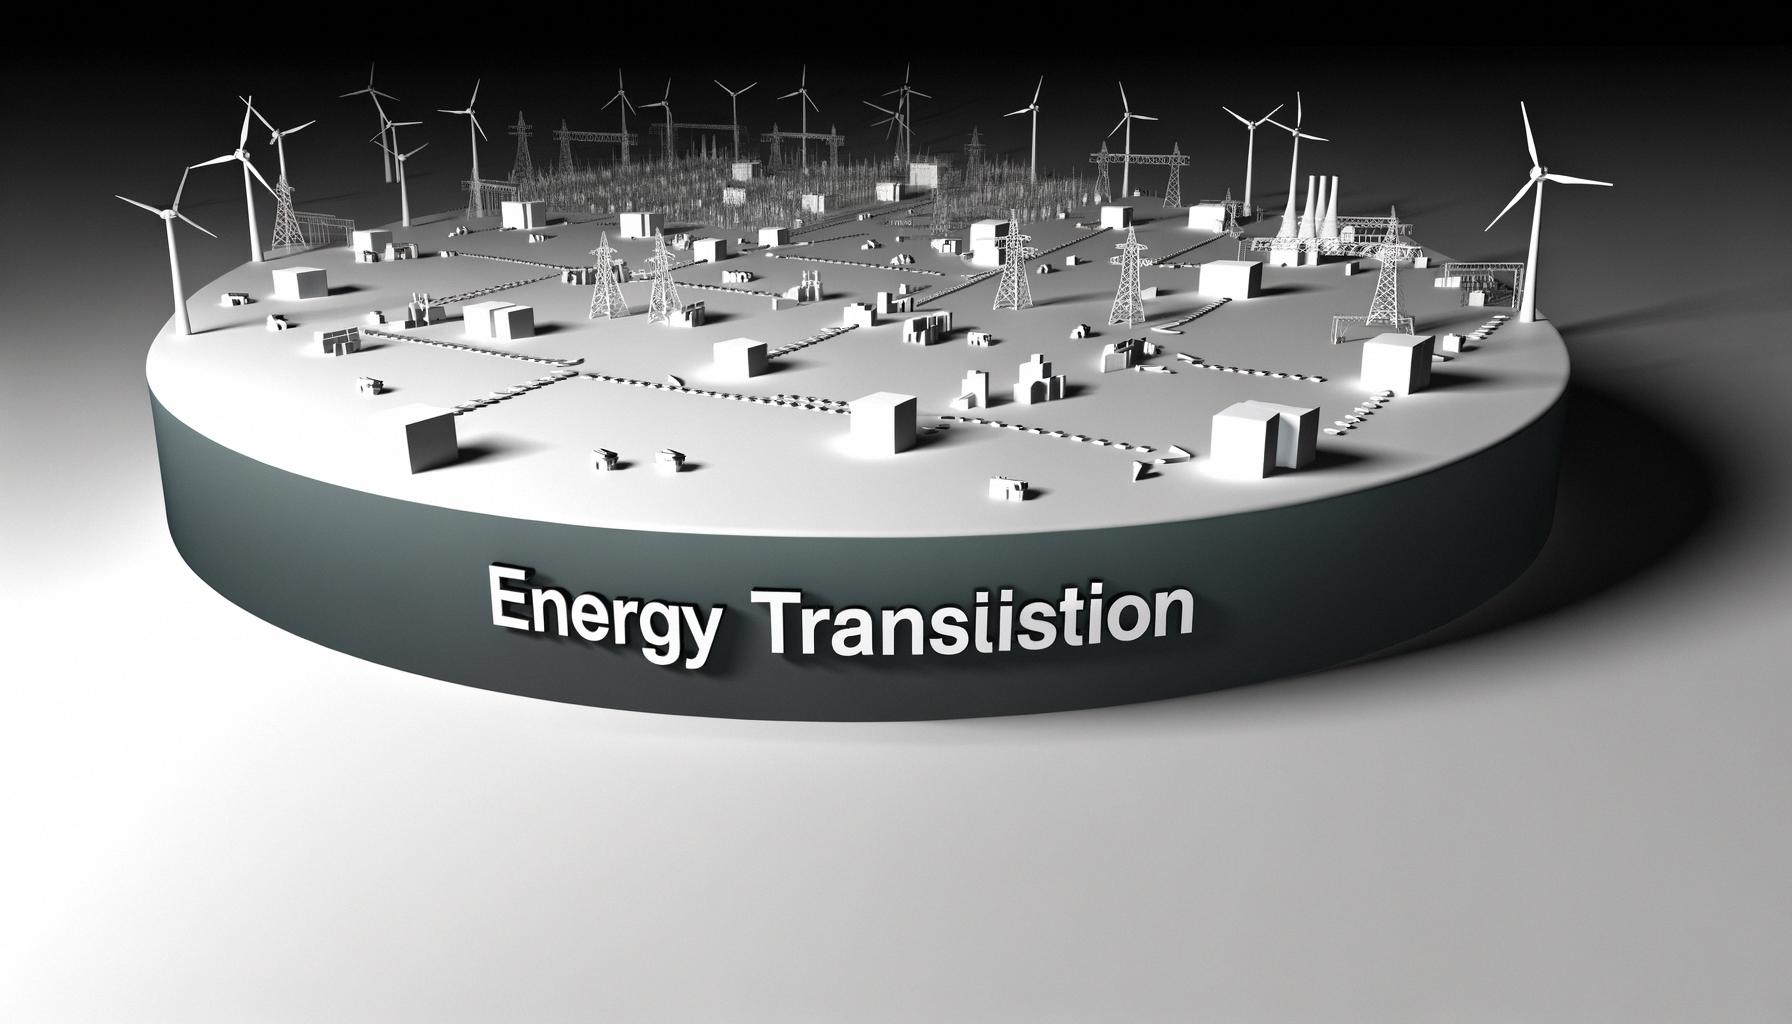 Energy transition continues with significant advancements and notable financial and geopolitical impediments.